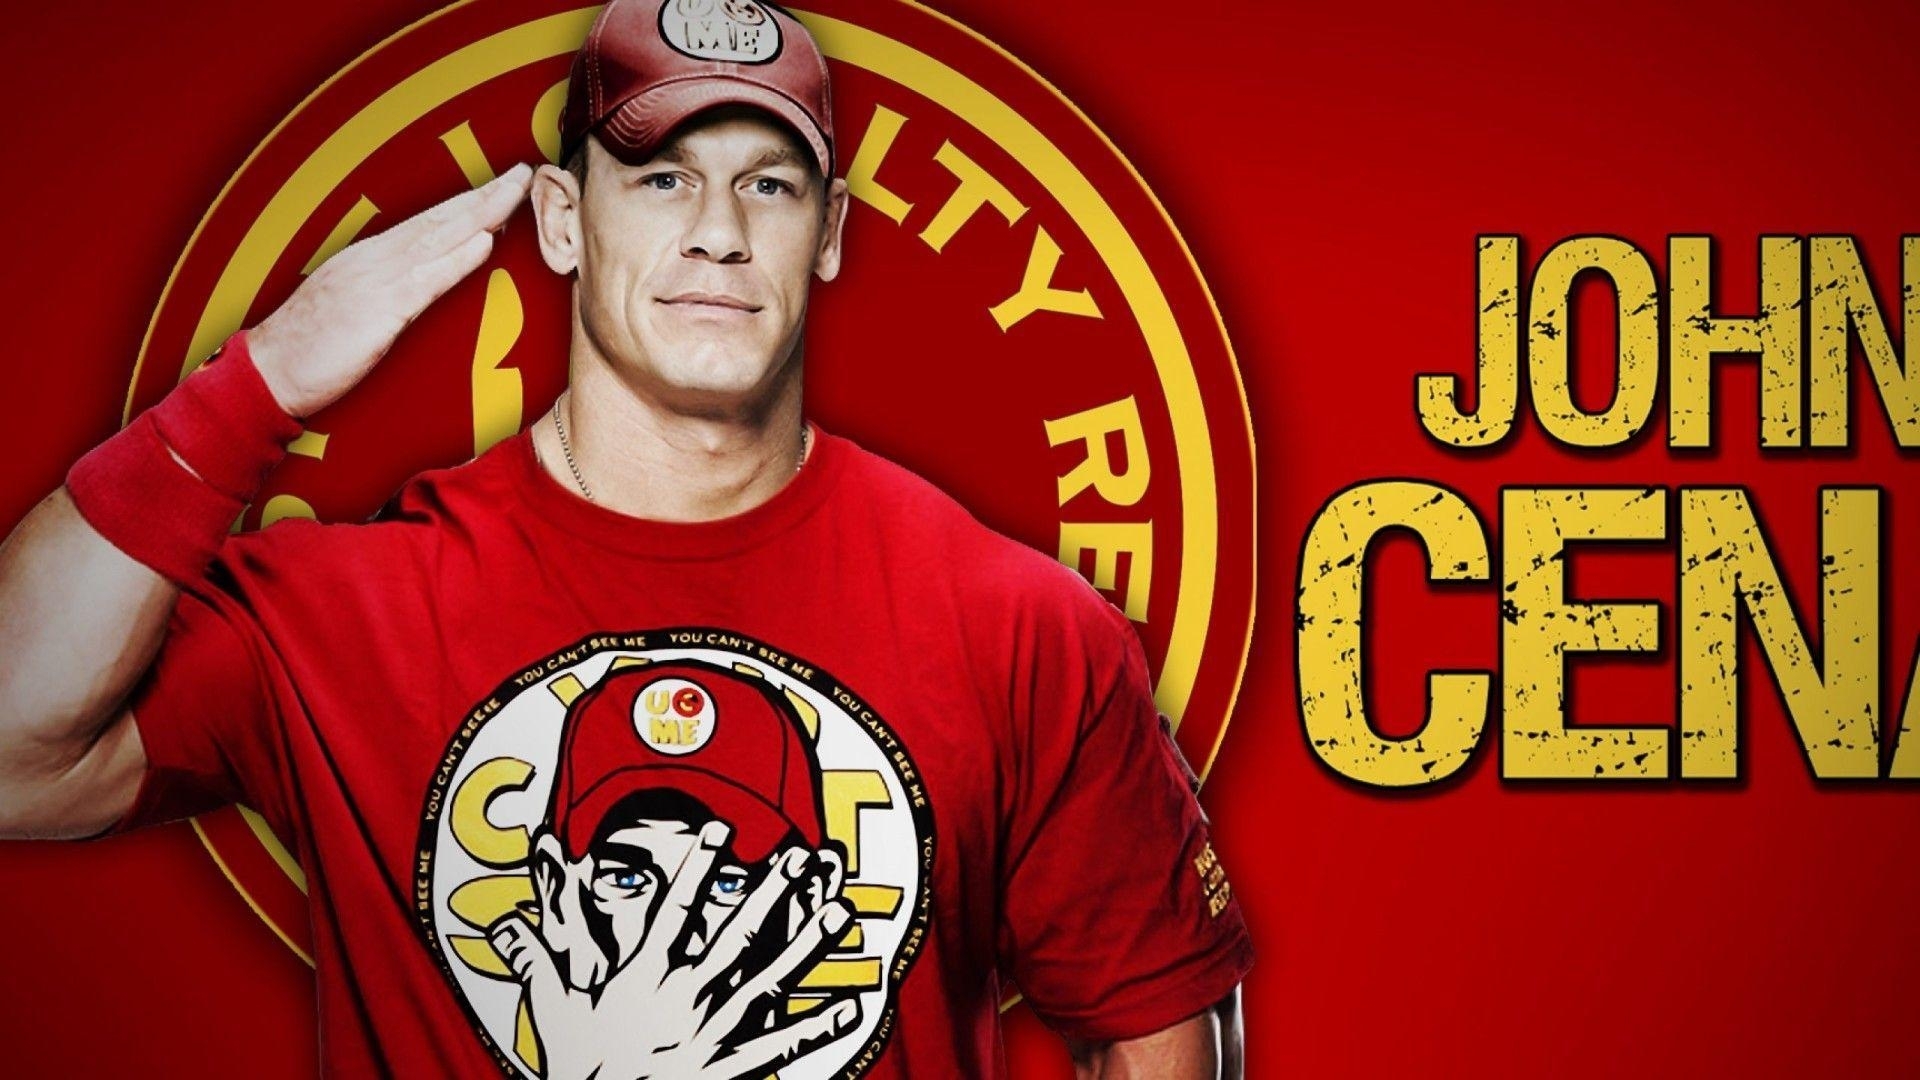 10 Finest And Most Current Wwe John Cena Wallpaper for Desktop with FULL HD 1080p...